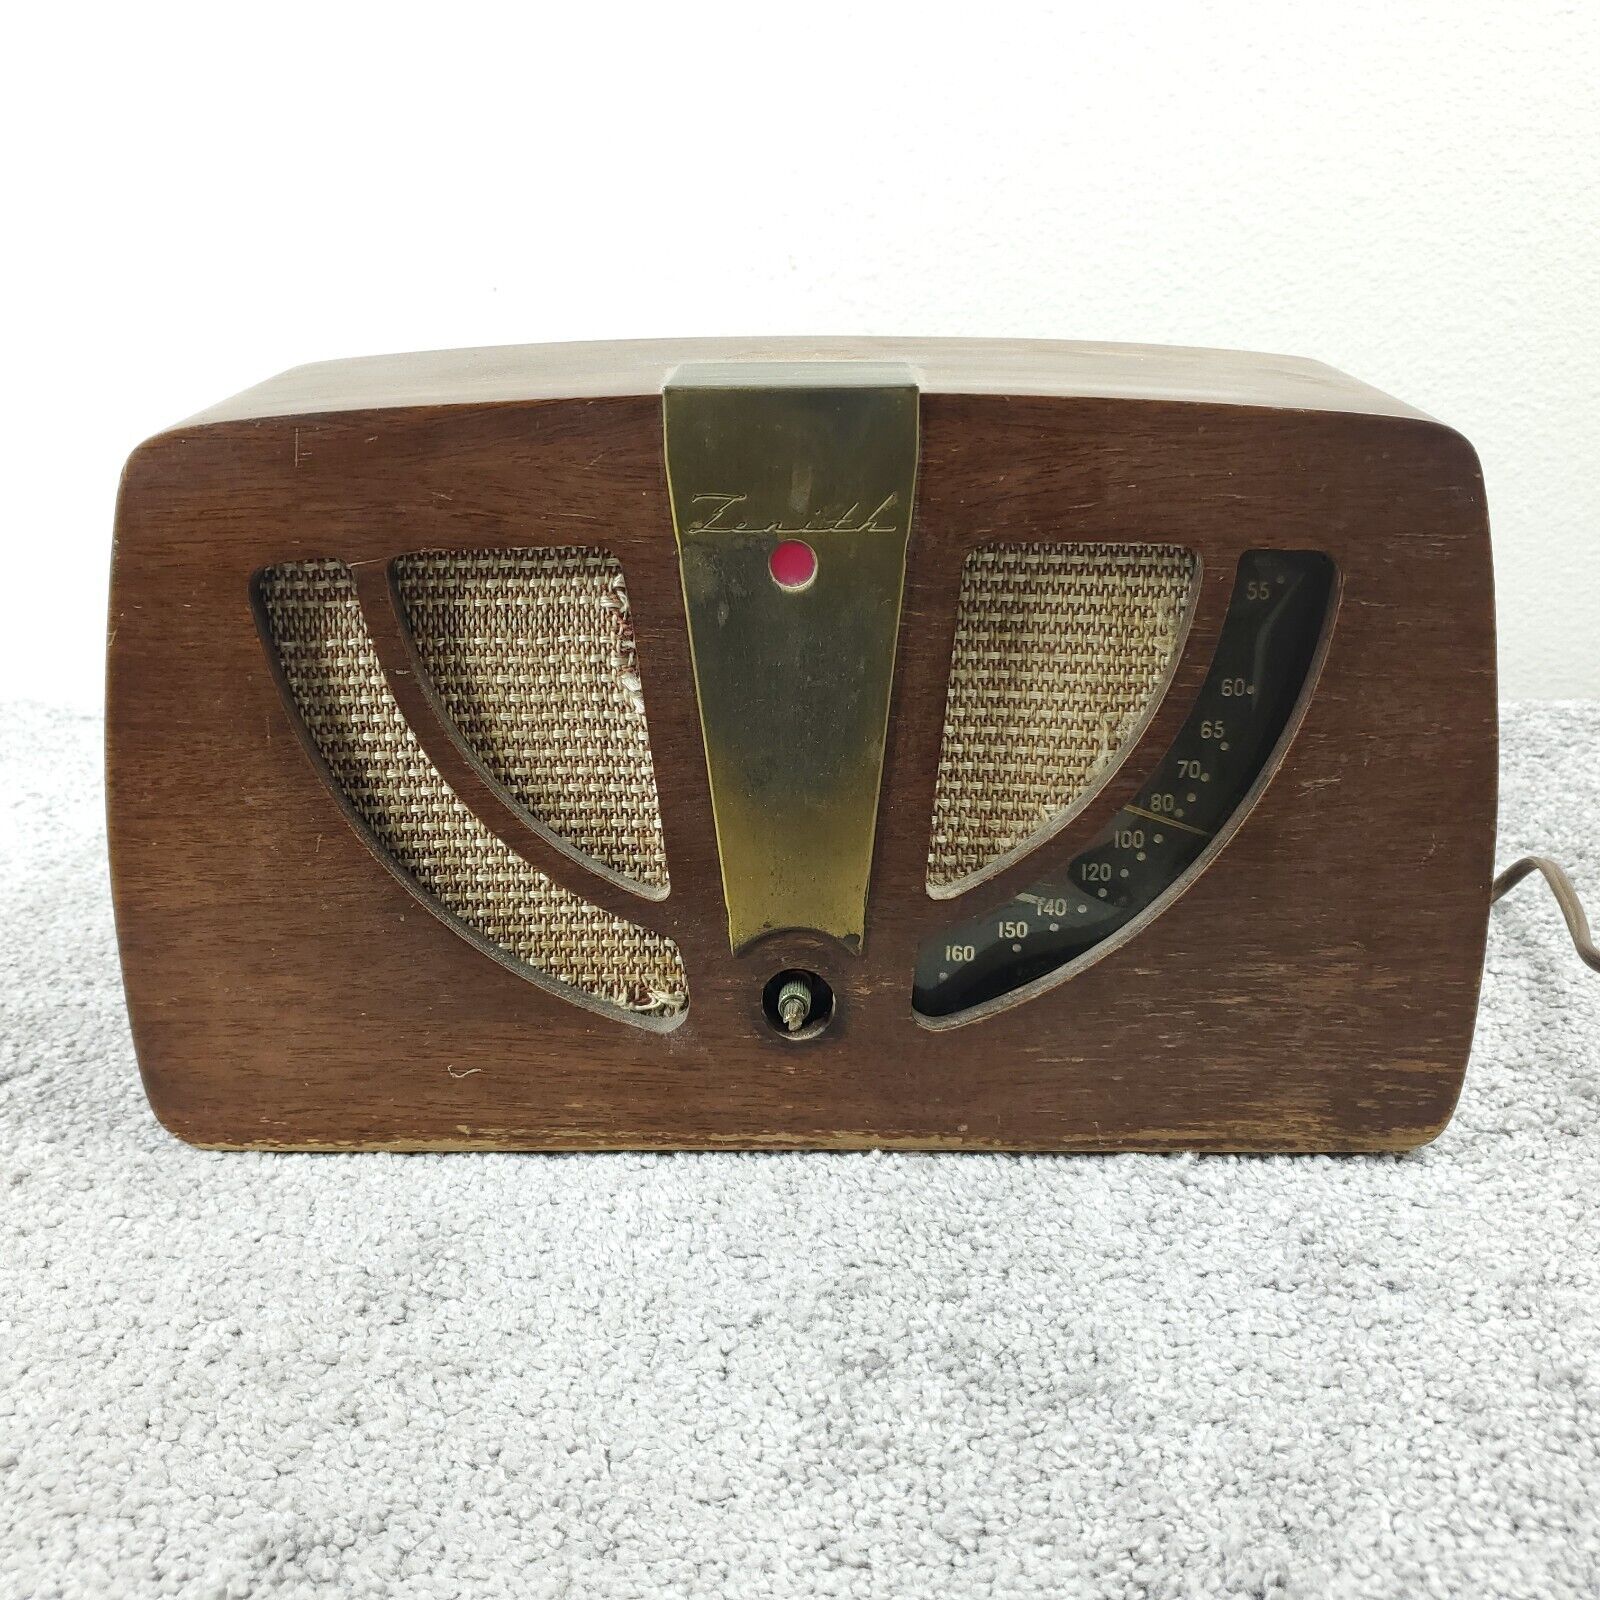 Vintage Zenith Tube Radio AM Model 6D030-Z Eames Wood Cabinet Not Working